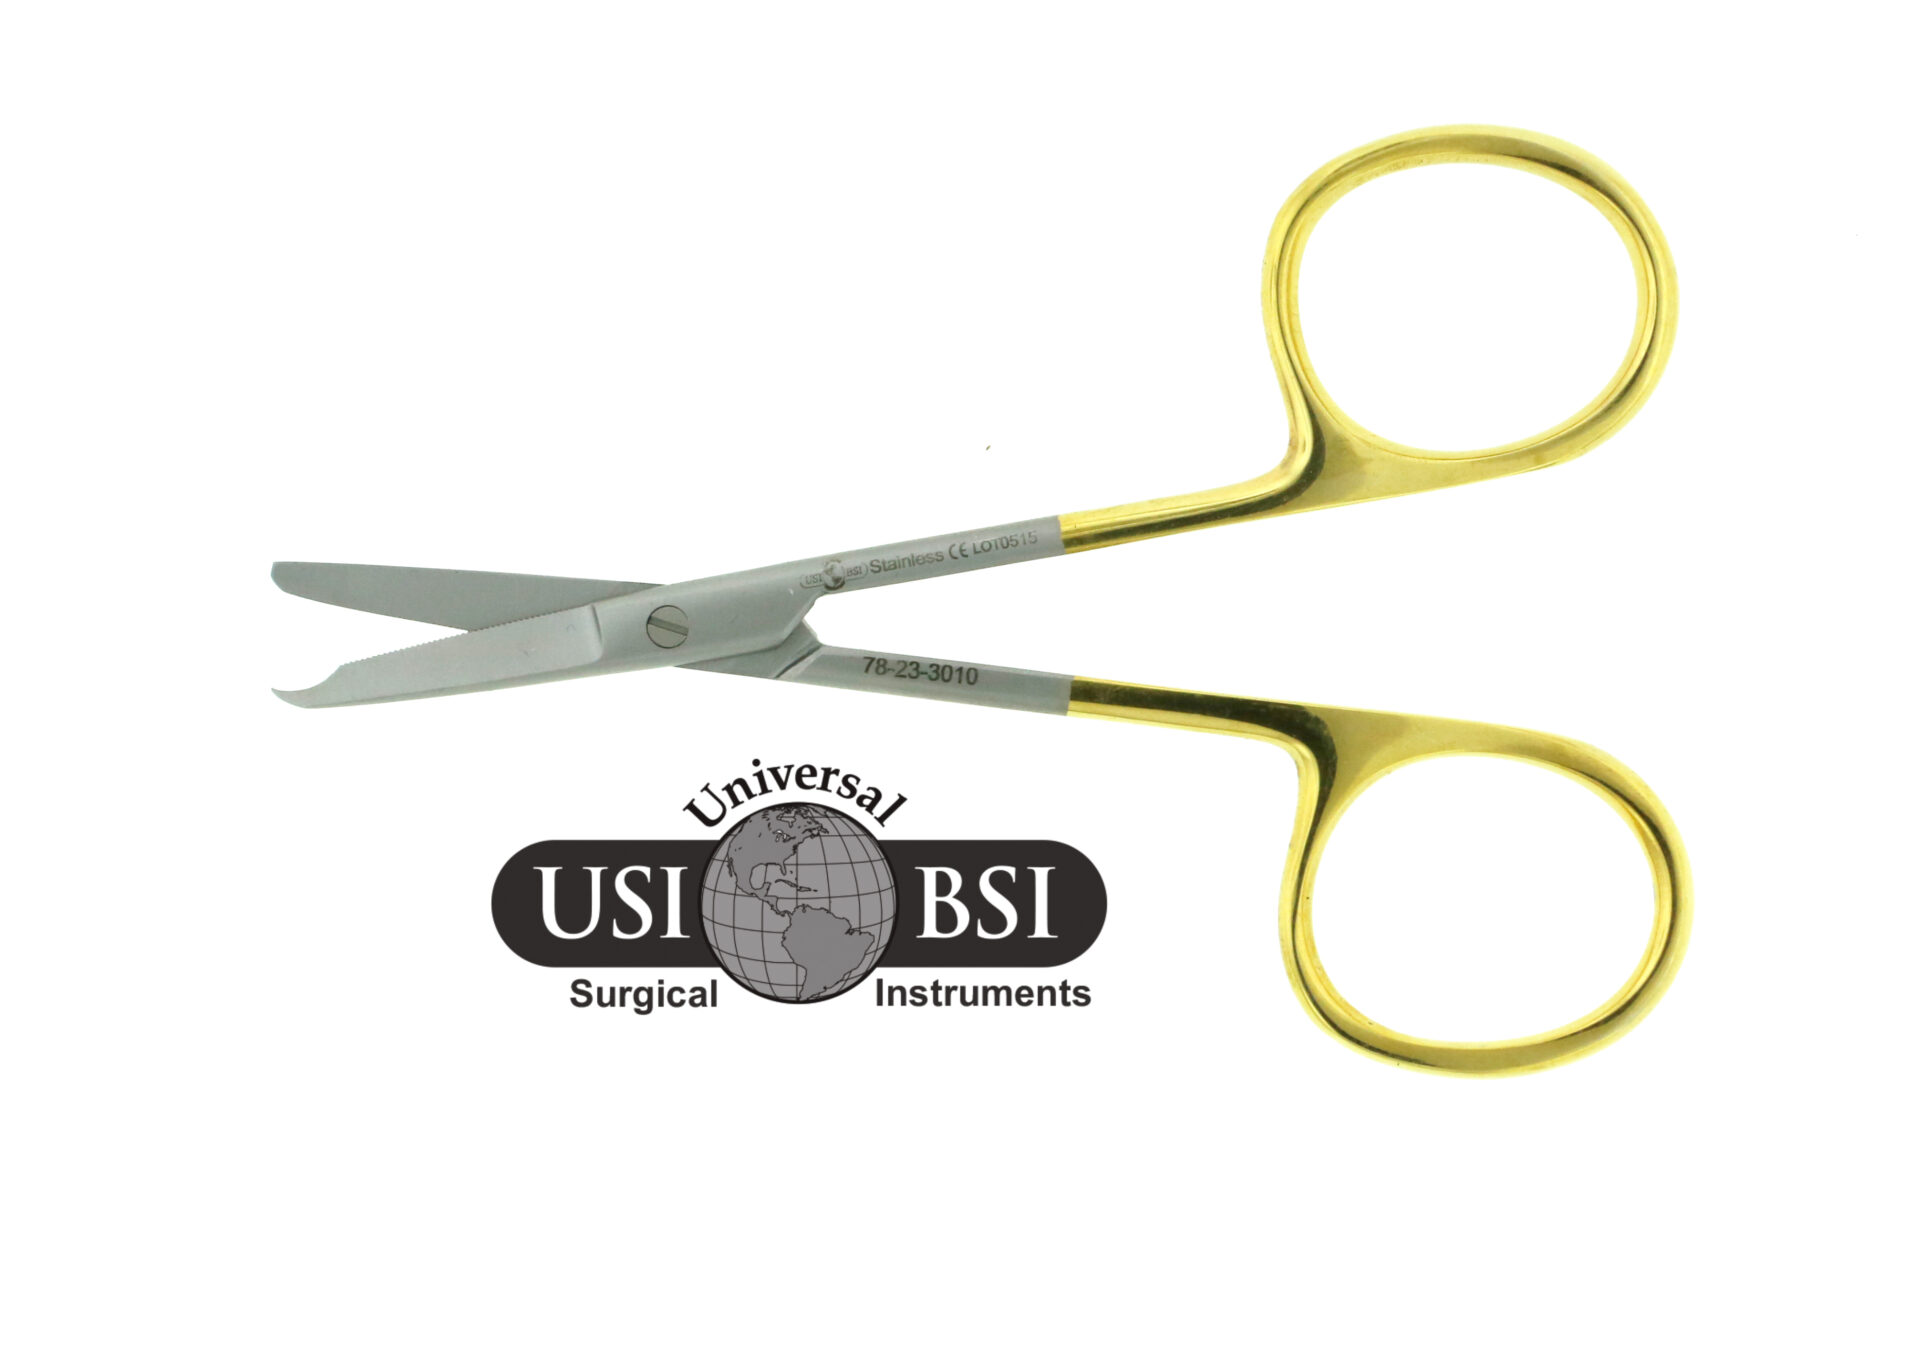 A pair of scissors with yellow handles and silver tips.